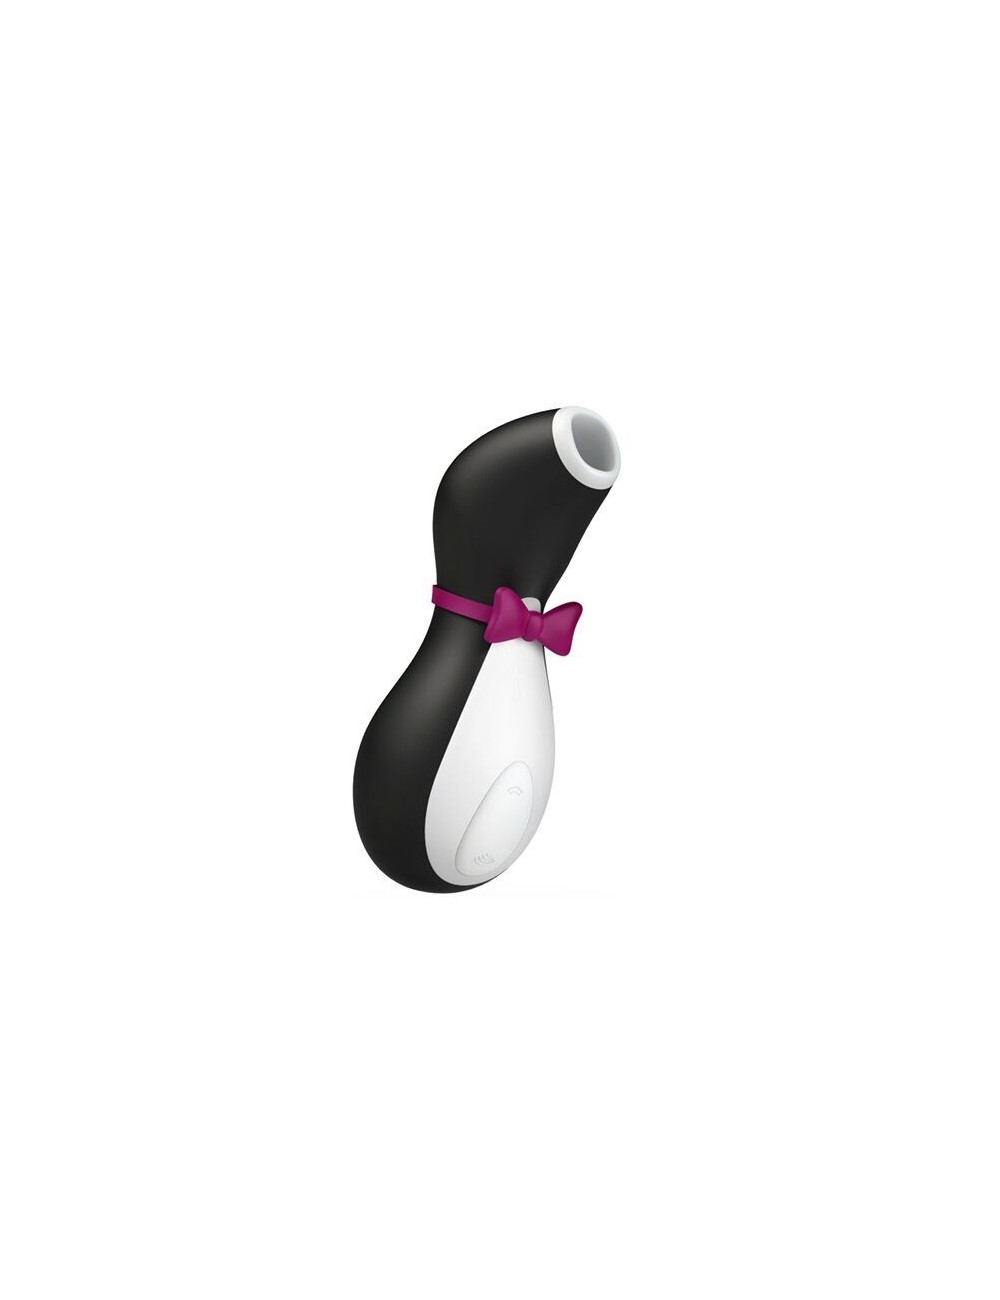 SATISFYER PRO PENGUIN NG EDITION 2020